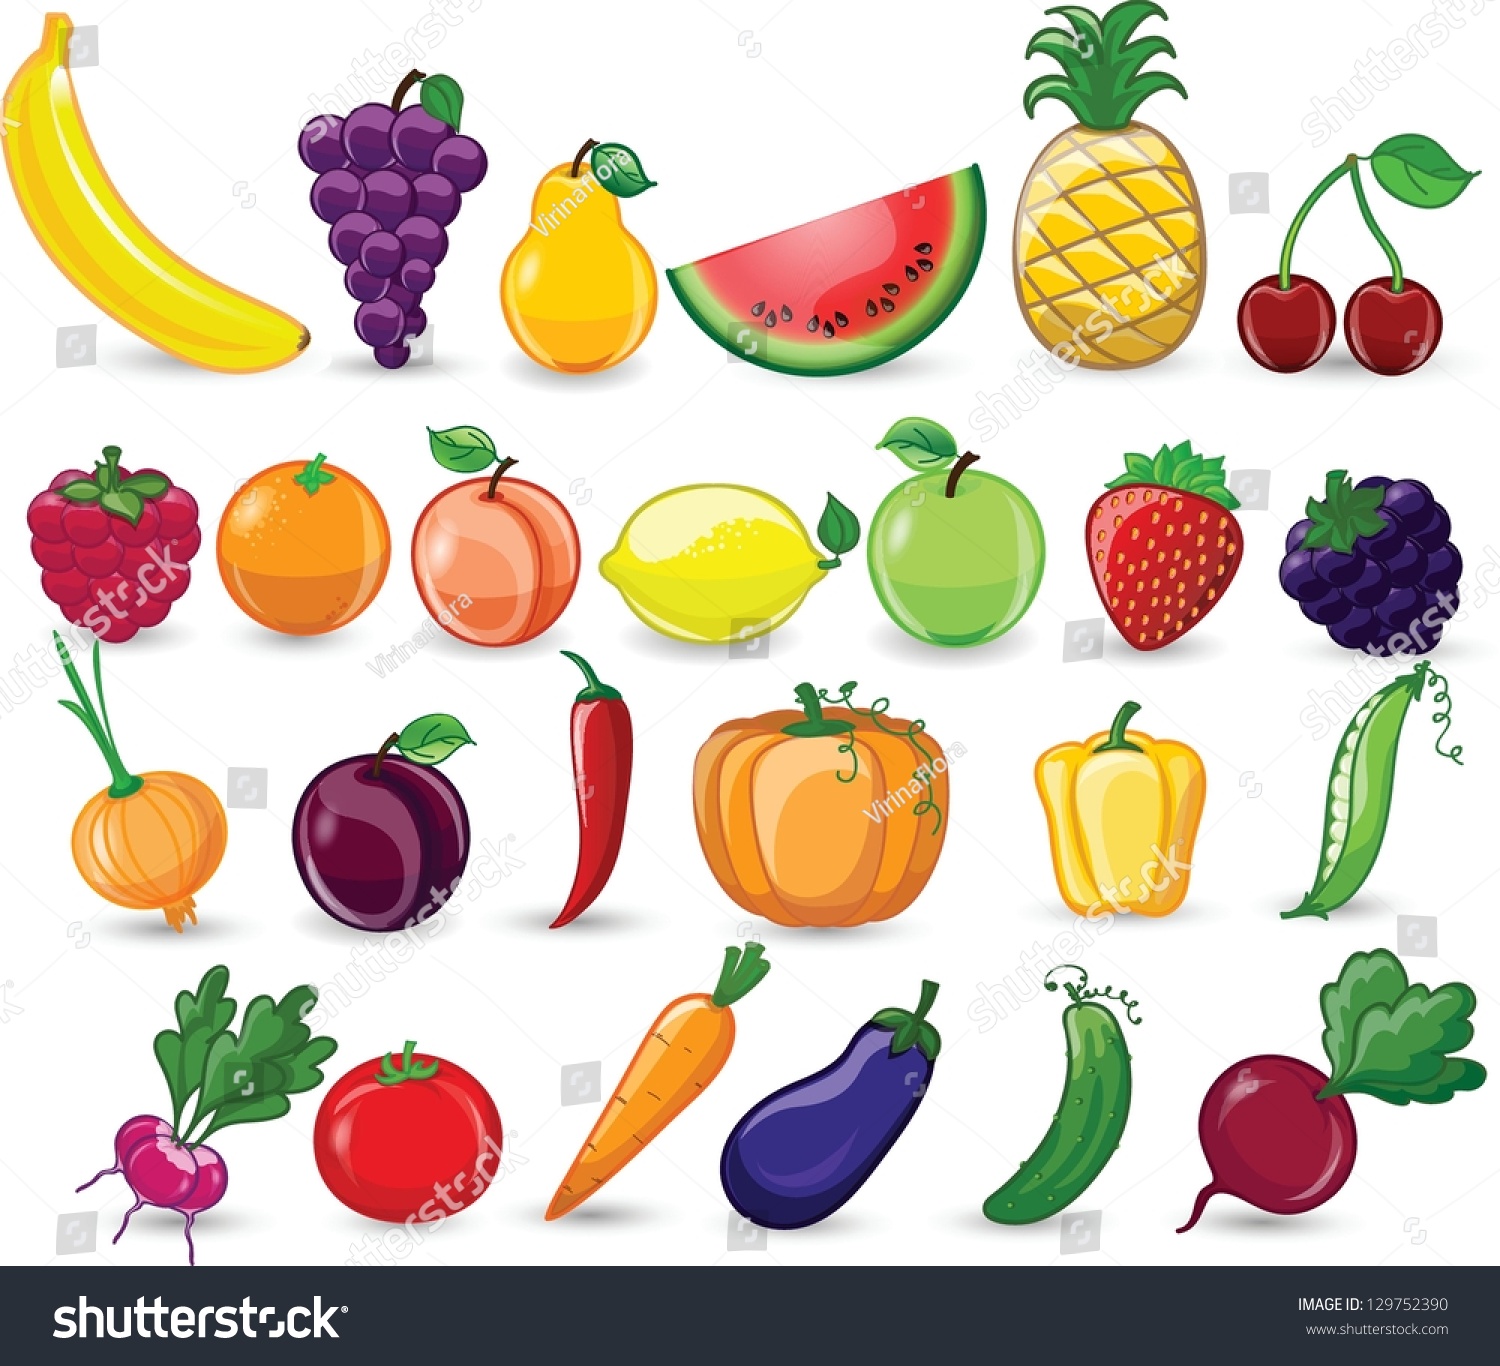 Cartoon Vegetables And Fruits Stock Vector Illustration 129752390 ...